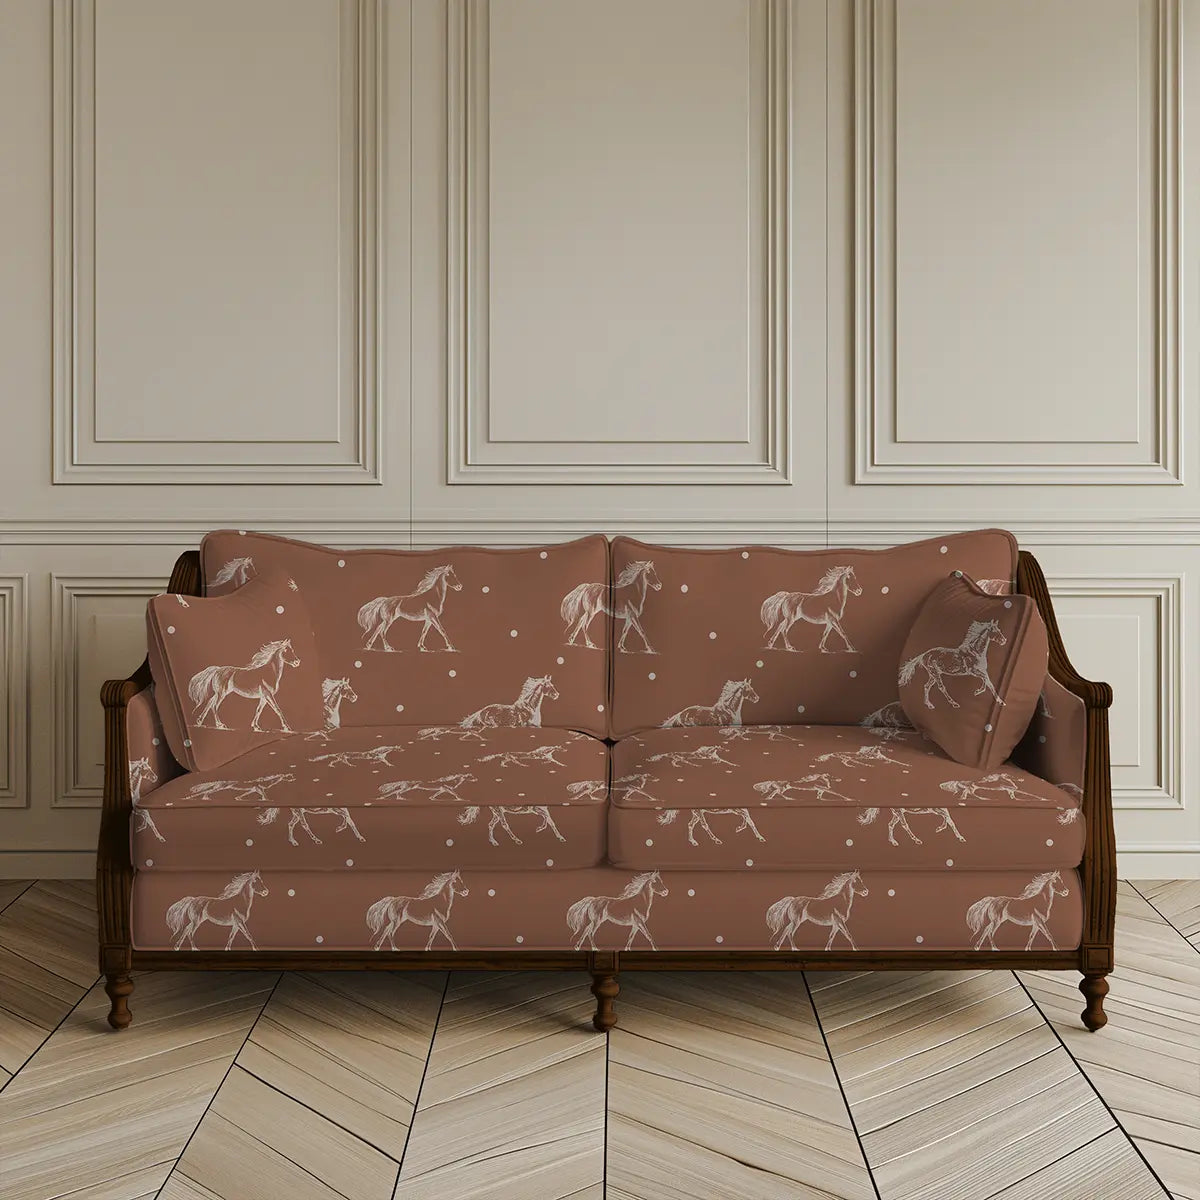 Stallion Sofa and Chairs Upholstery Fabric Brown